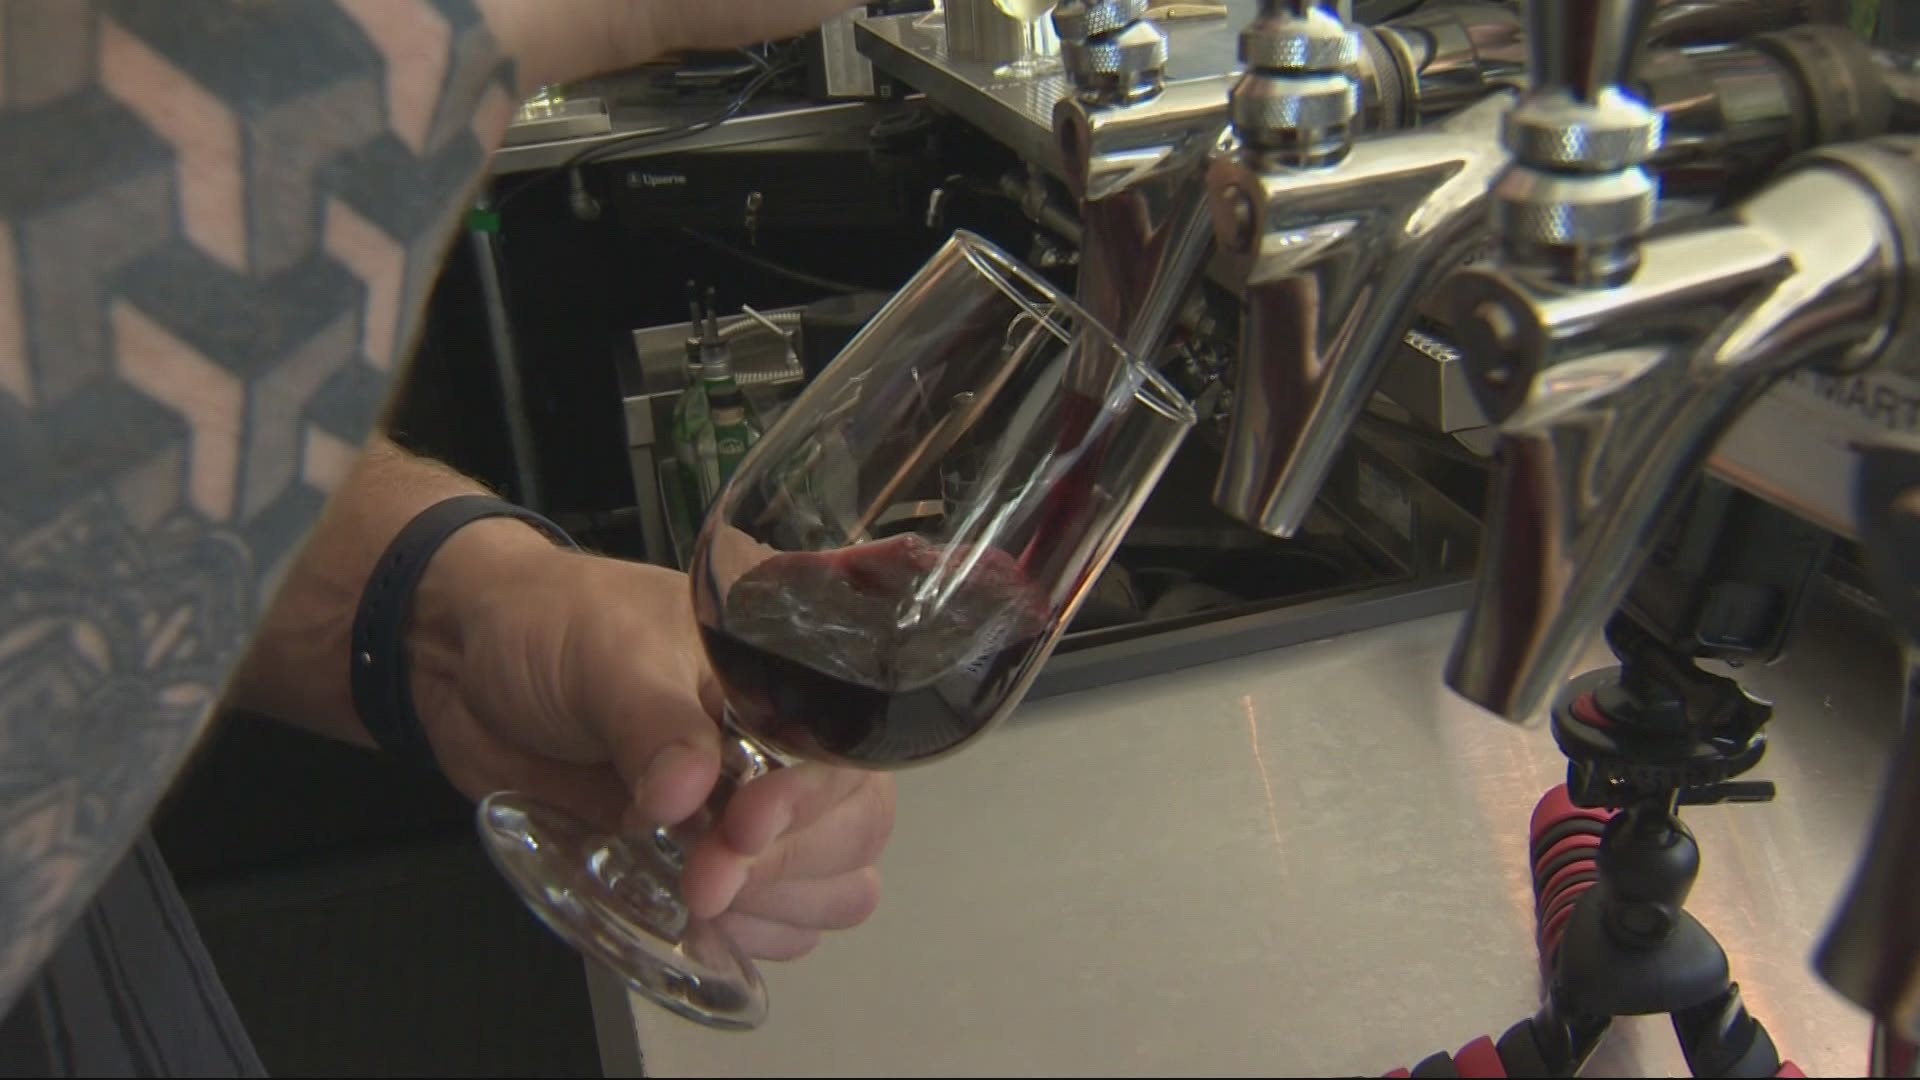 KEX Portland hopes their selection of Oregon wines will prove that kegs aren't just for beer.